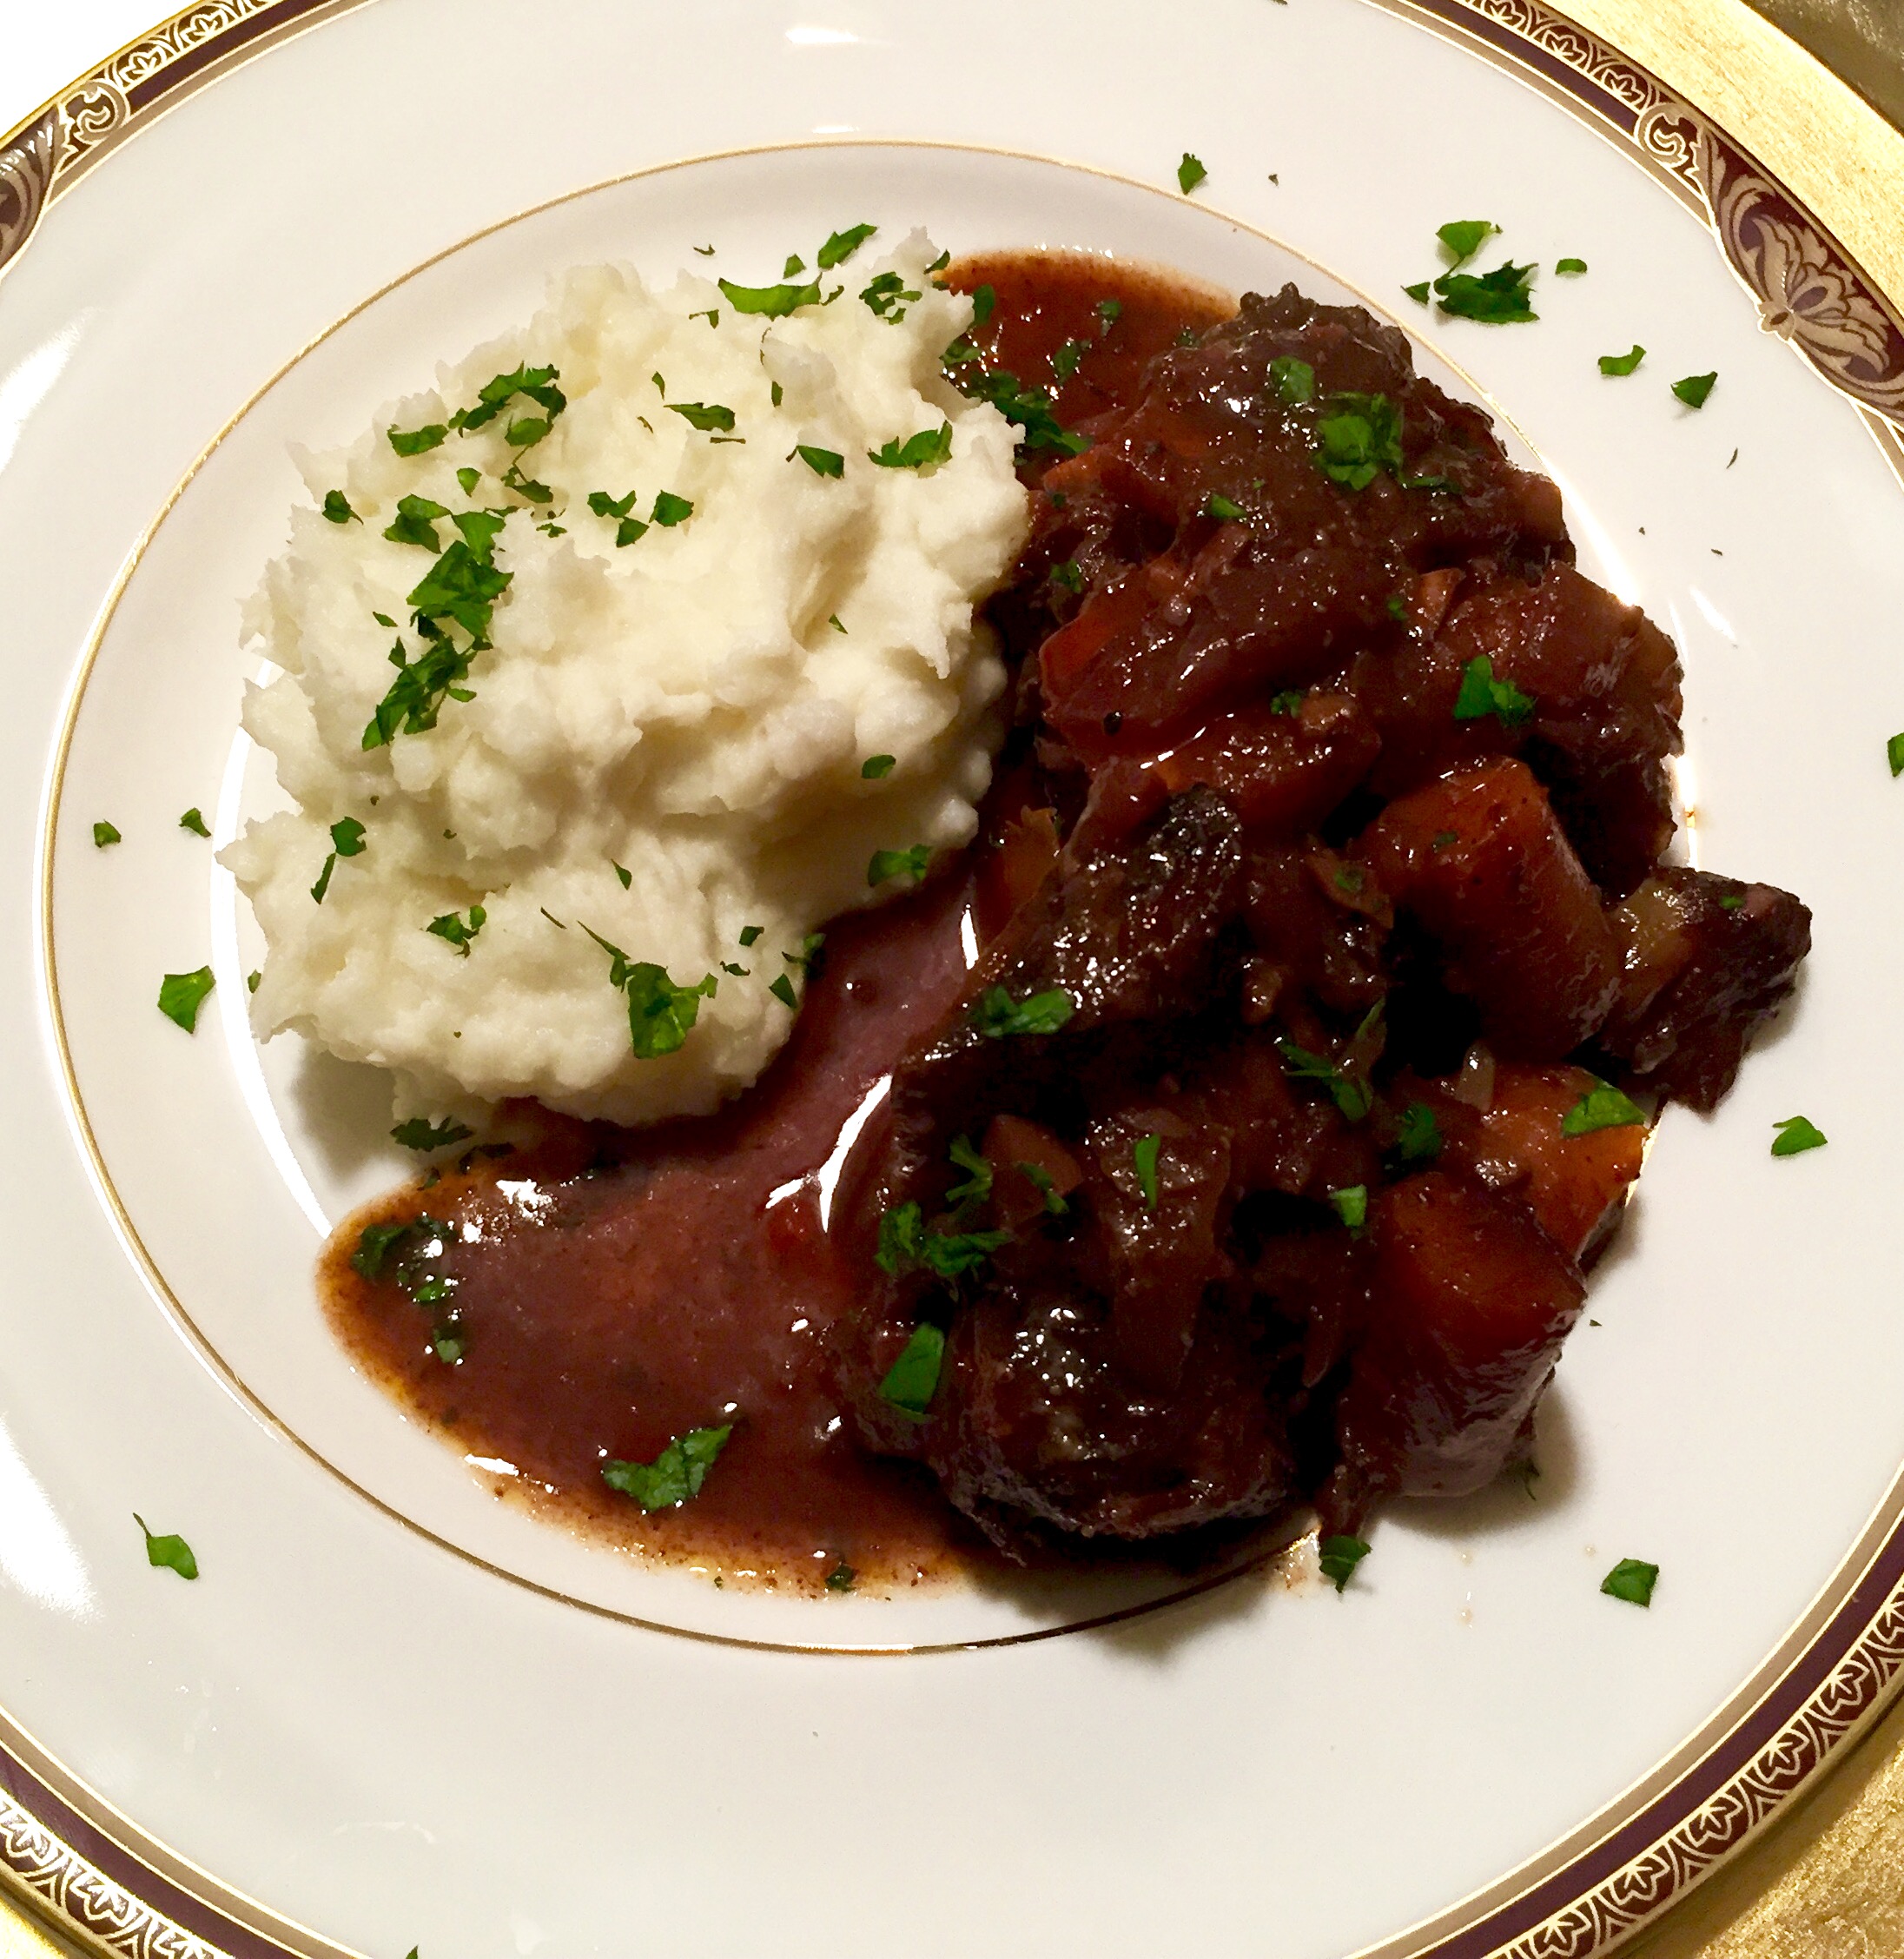 Slow Cooked Indian-Spiced Short Ribs with Creamy Garlic Mashed Potatoes